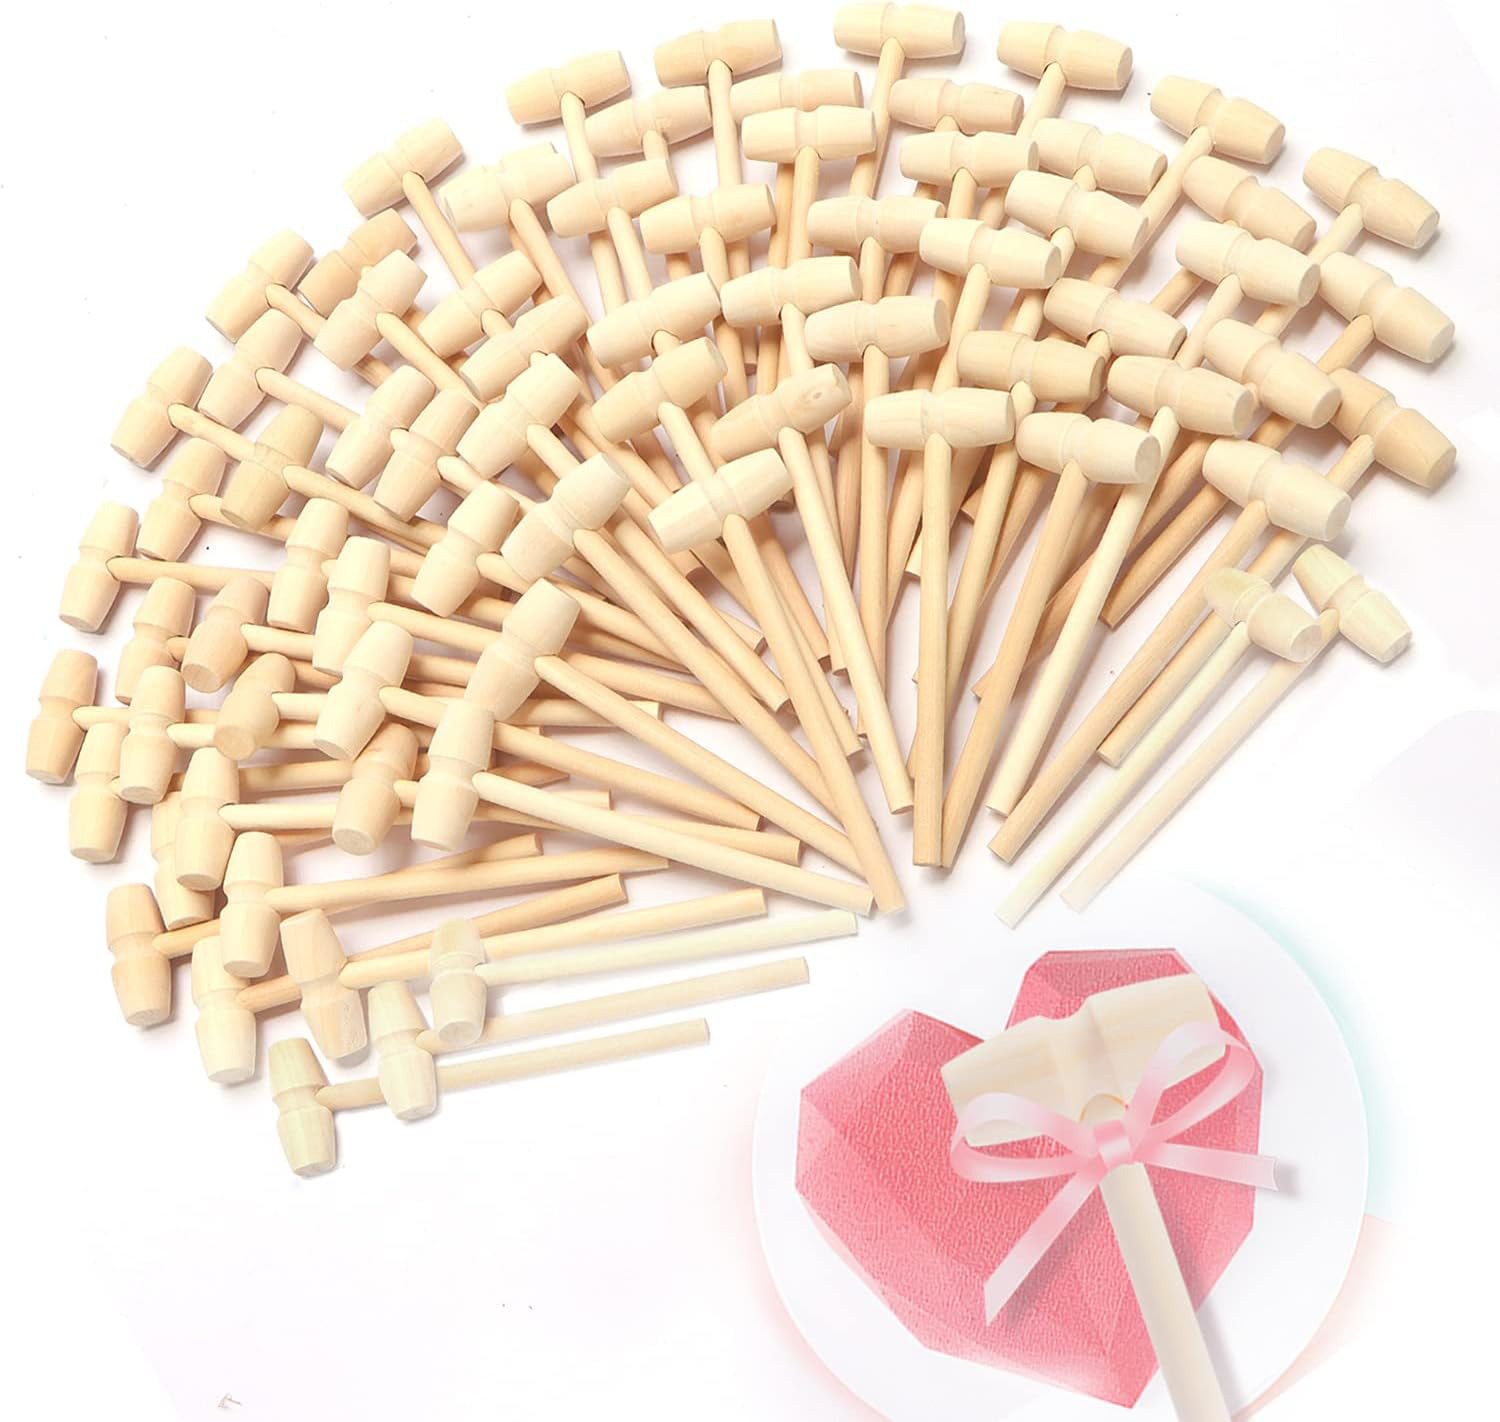 Wooden Hammers for Breakable Heart Hammer x75, Small Wooden Mallet, Mini Wooden